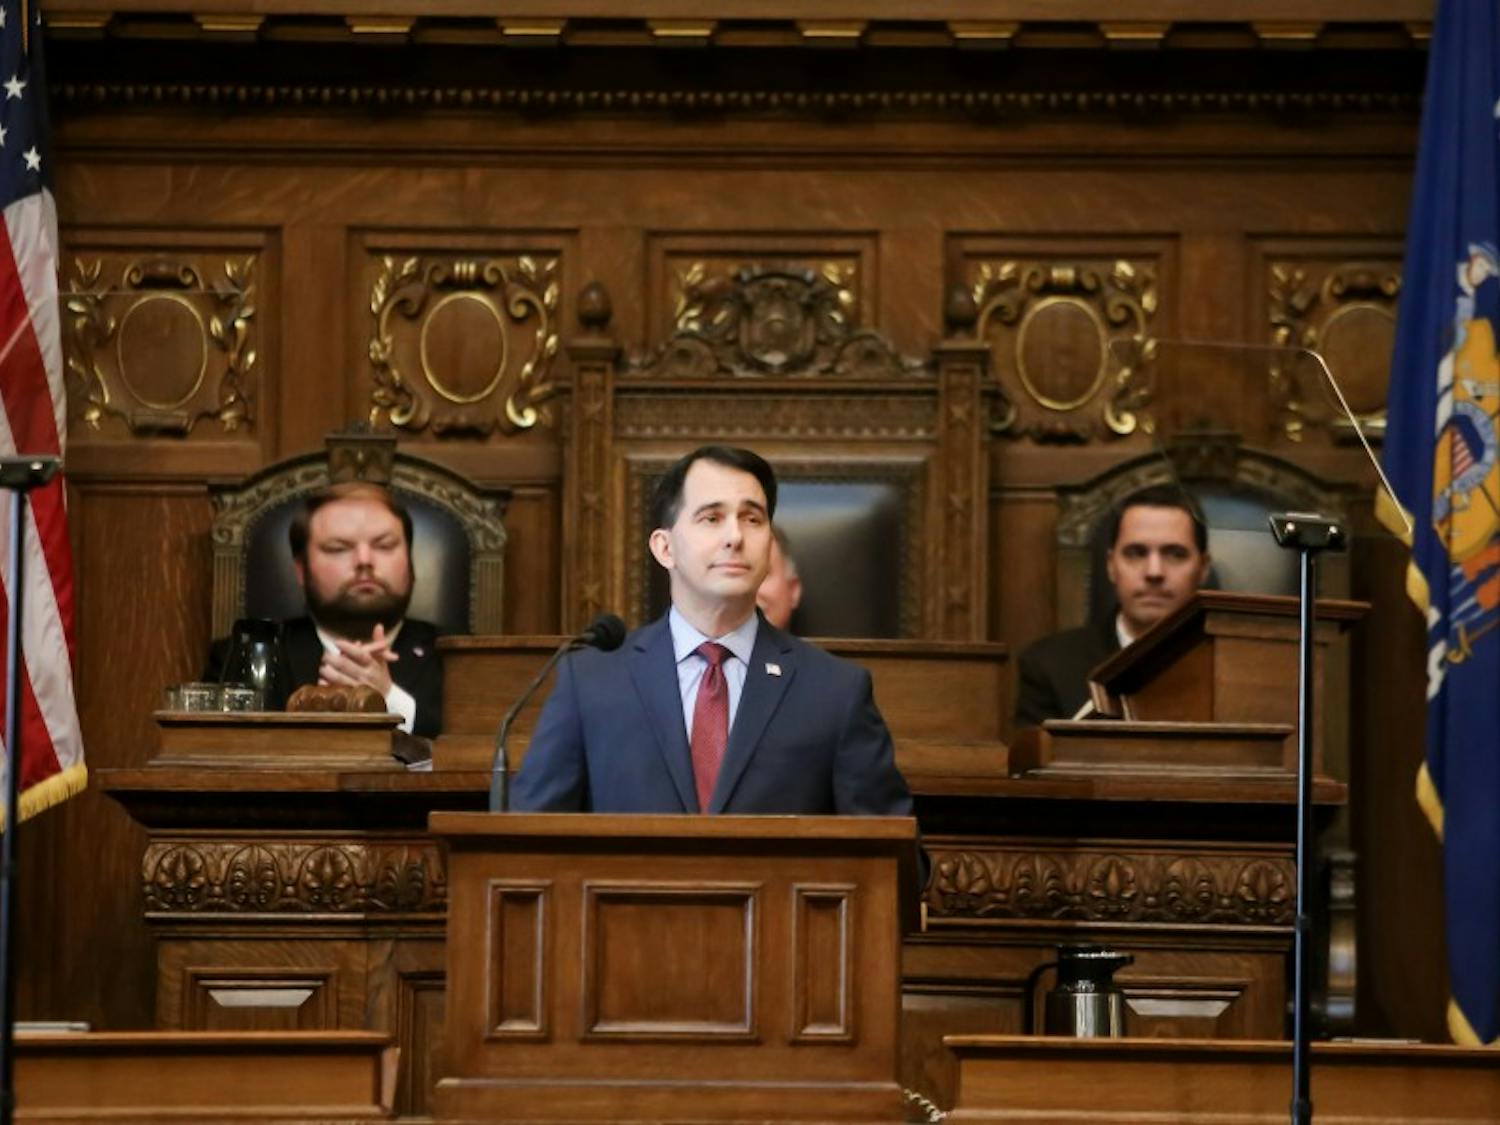 Gov. Scott Walker gave his biennial budget address to a Joint Session of state Legislature Wednesday at the state Capitol, emphasized how his administration is “working and winning for Wisconsin."&nbsp;